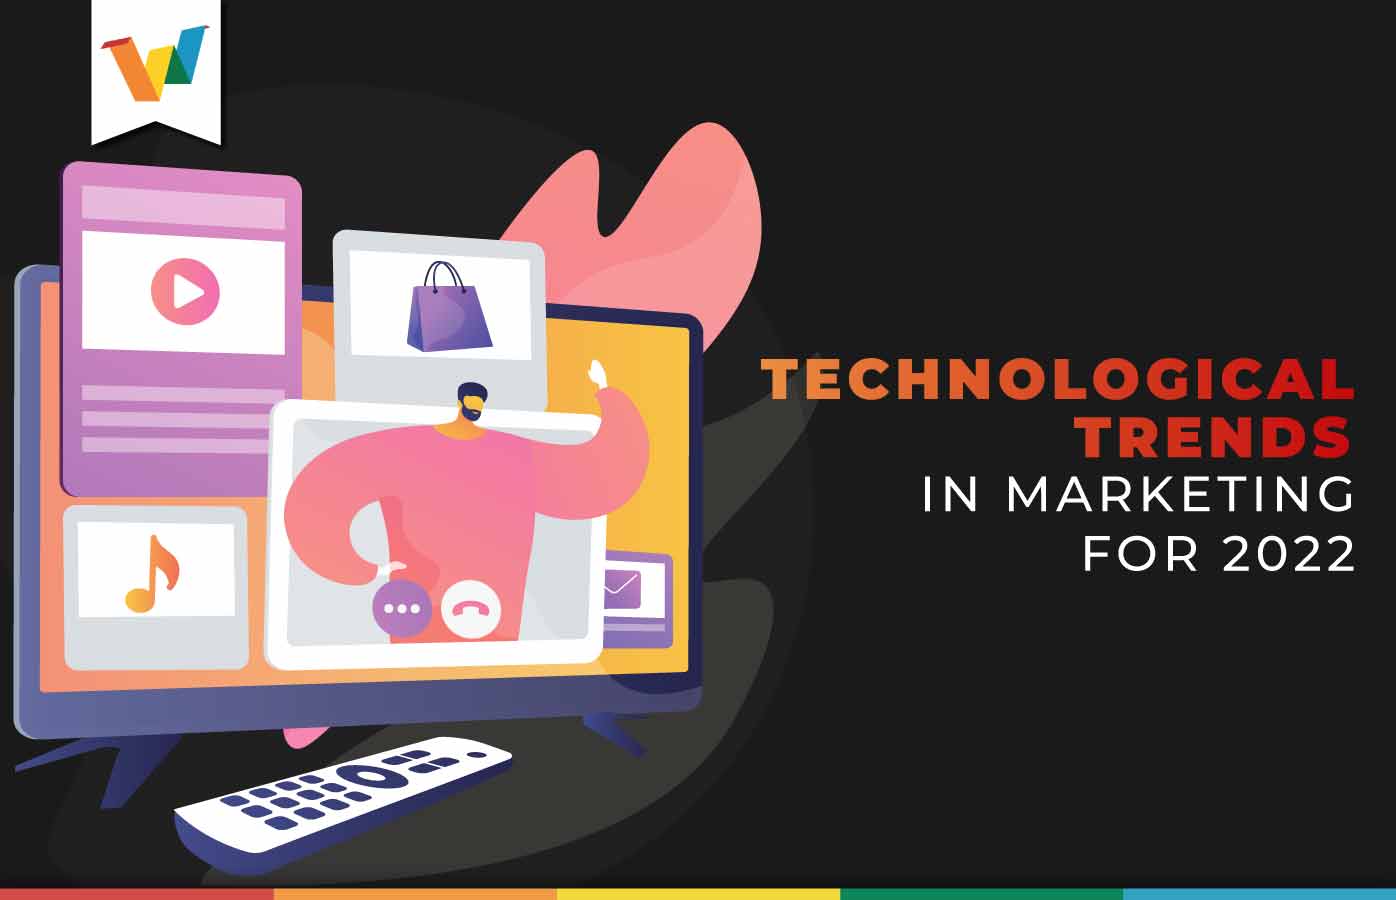 Technological trends in marketing for 2022